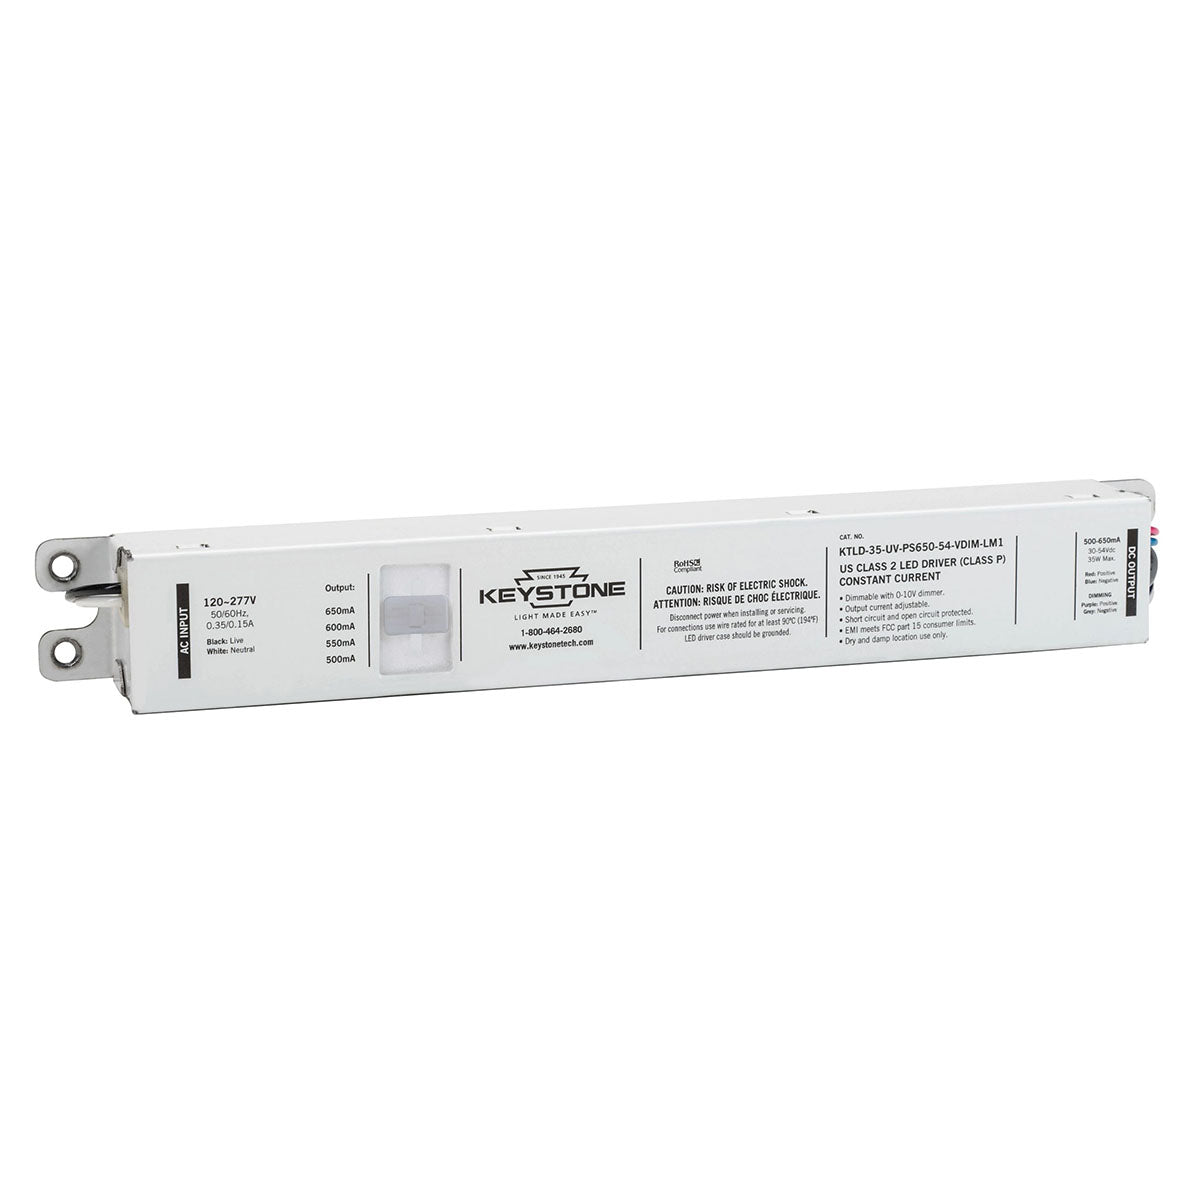 Power Select LED Driver, 35W, Adjustable Constant Current 550-650mA, 0-10V Dimming, 120-277V Input - Bees Lighting